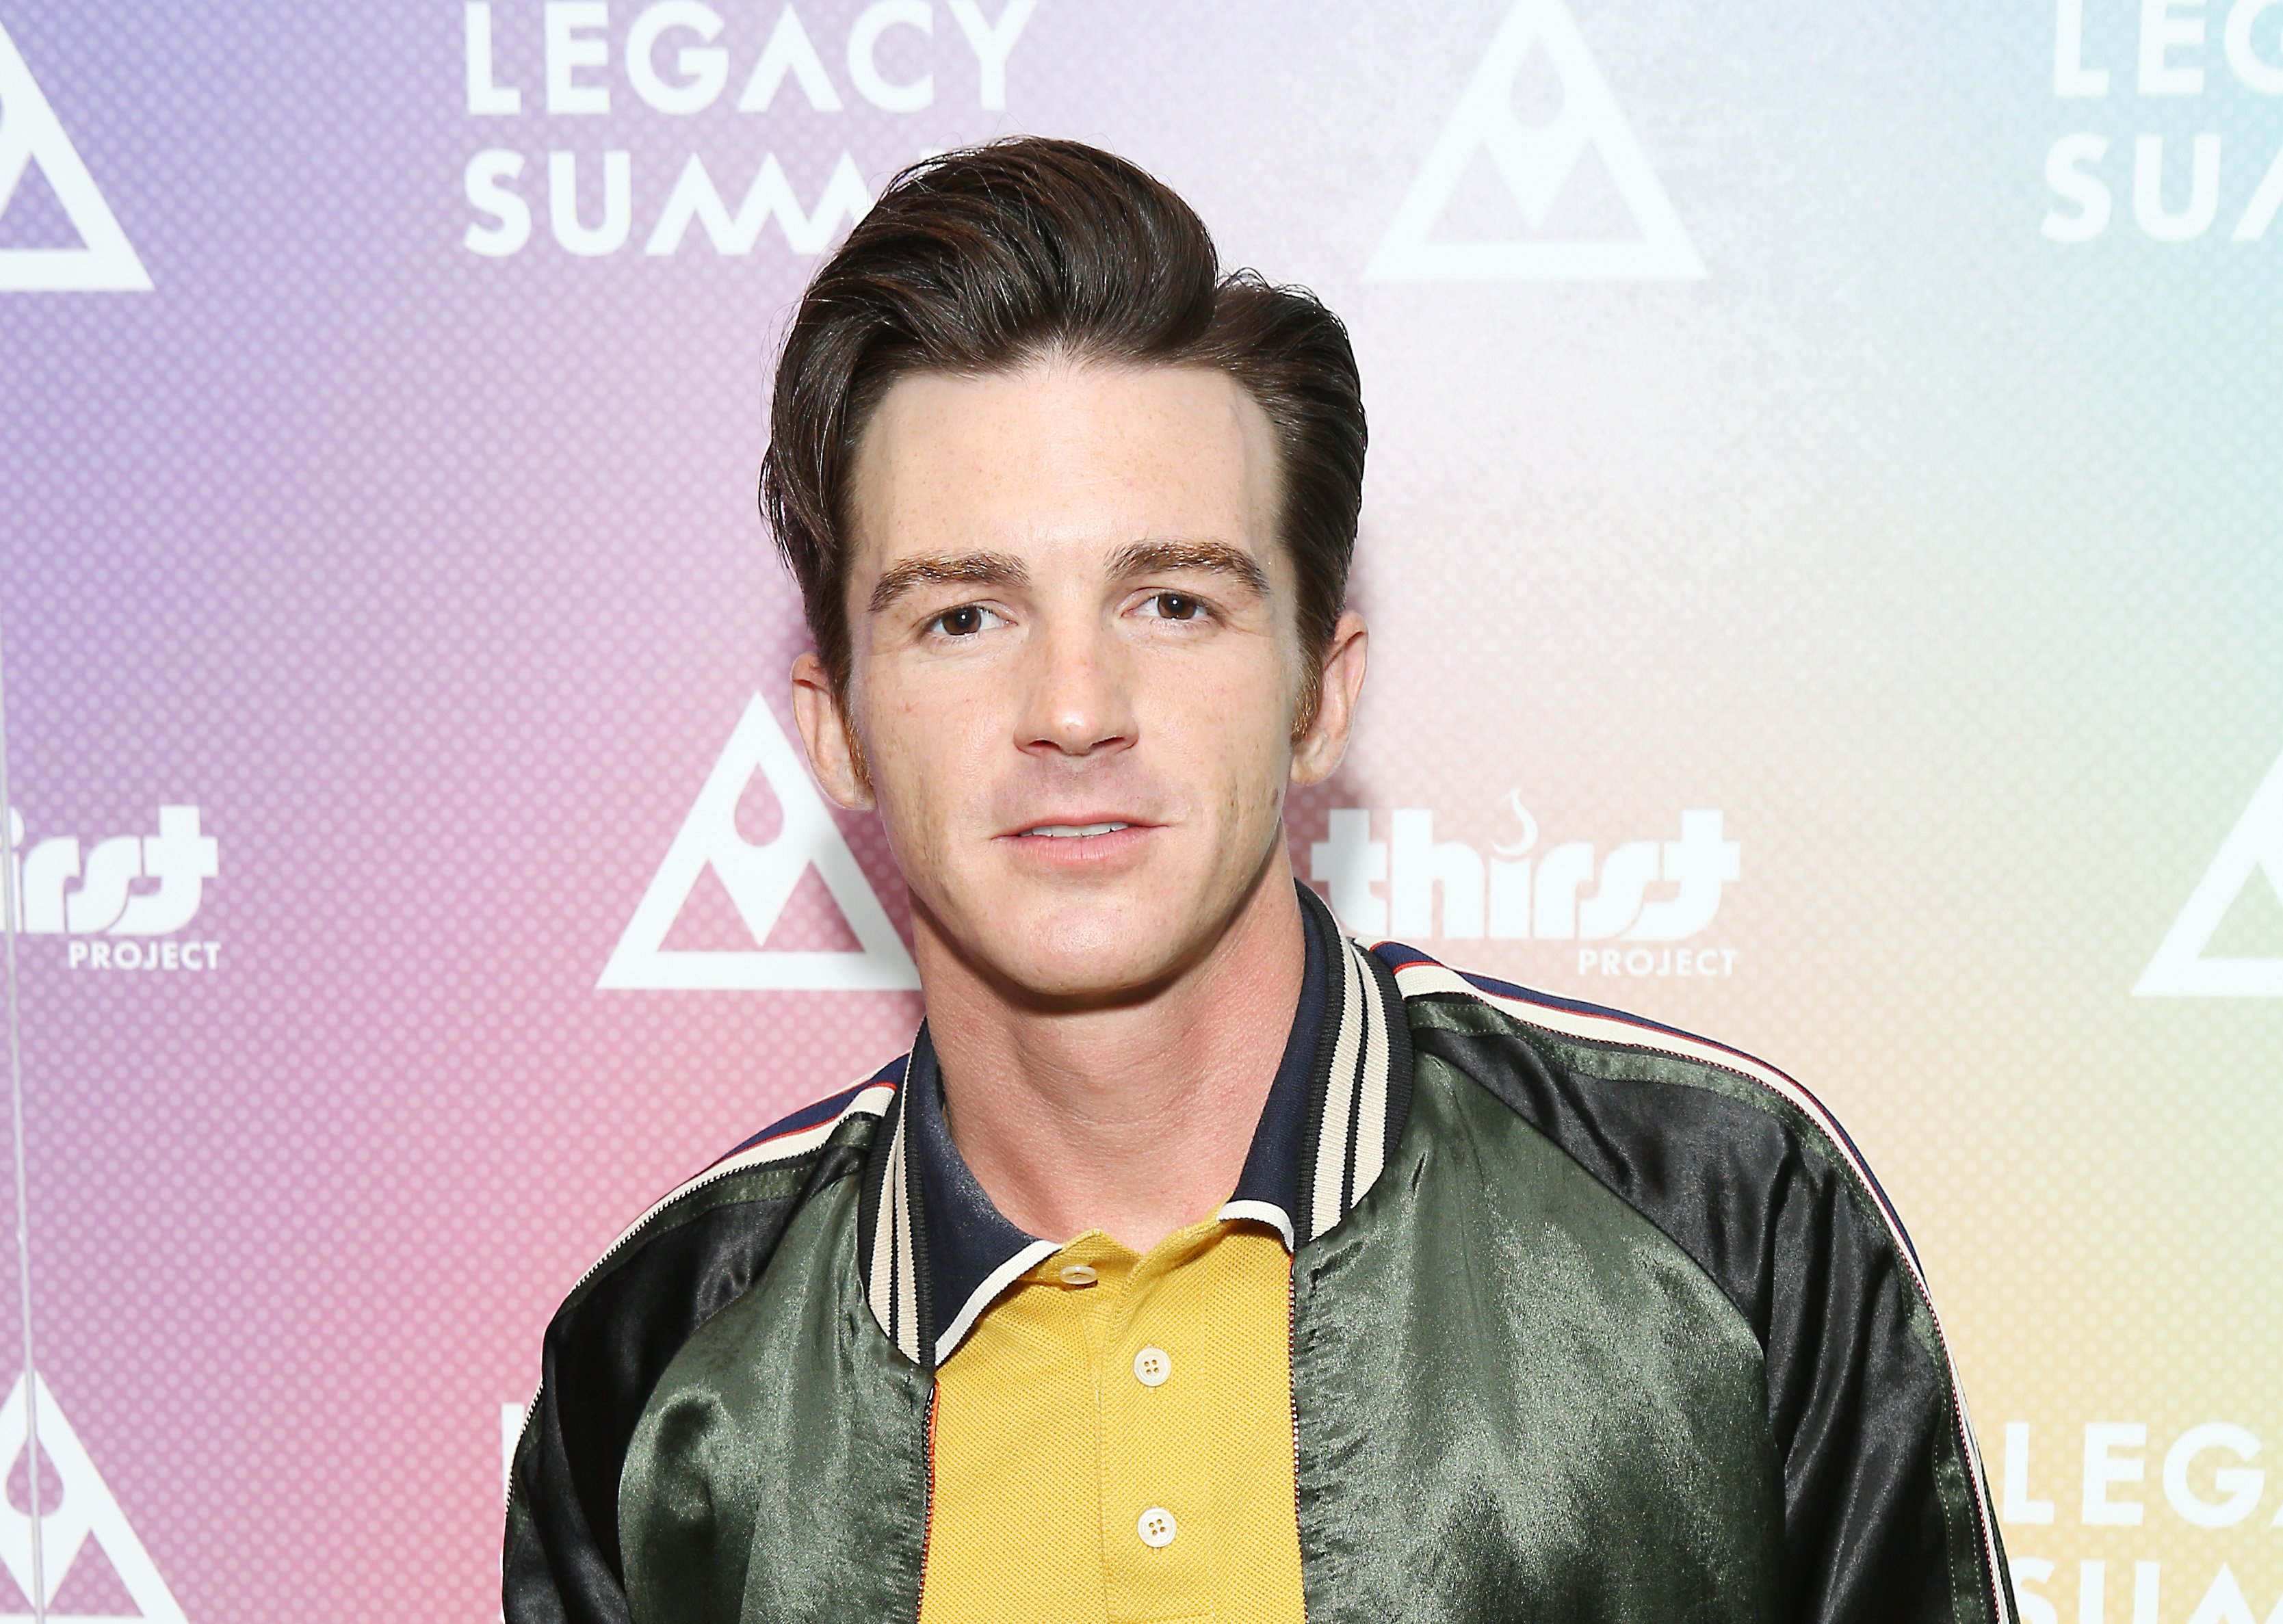 Drake Bell attends the Thirst Project's Inaugural Legacy Summit held at Pepperdine University on July 20, 2019 in Malibu, California | Photo: GettyImages